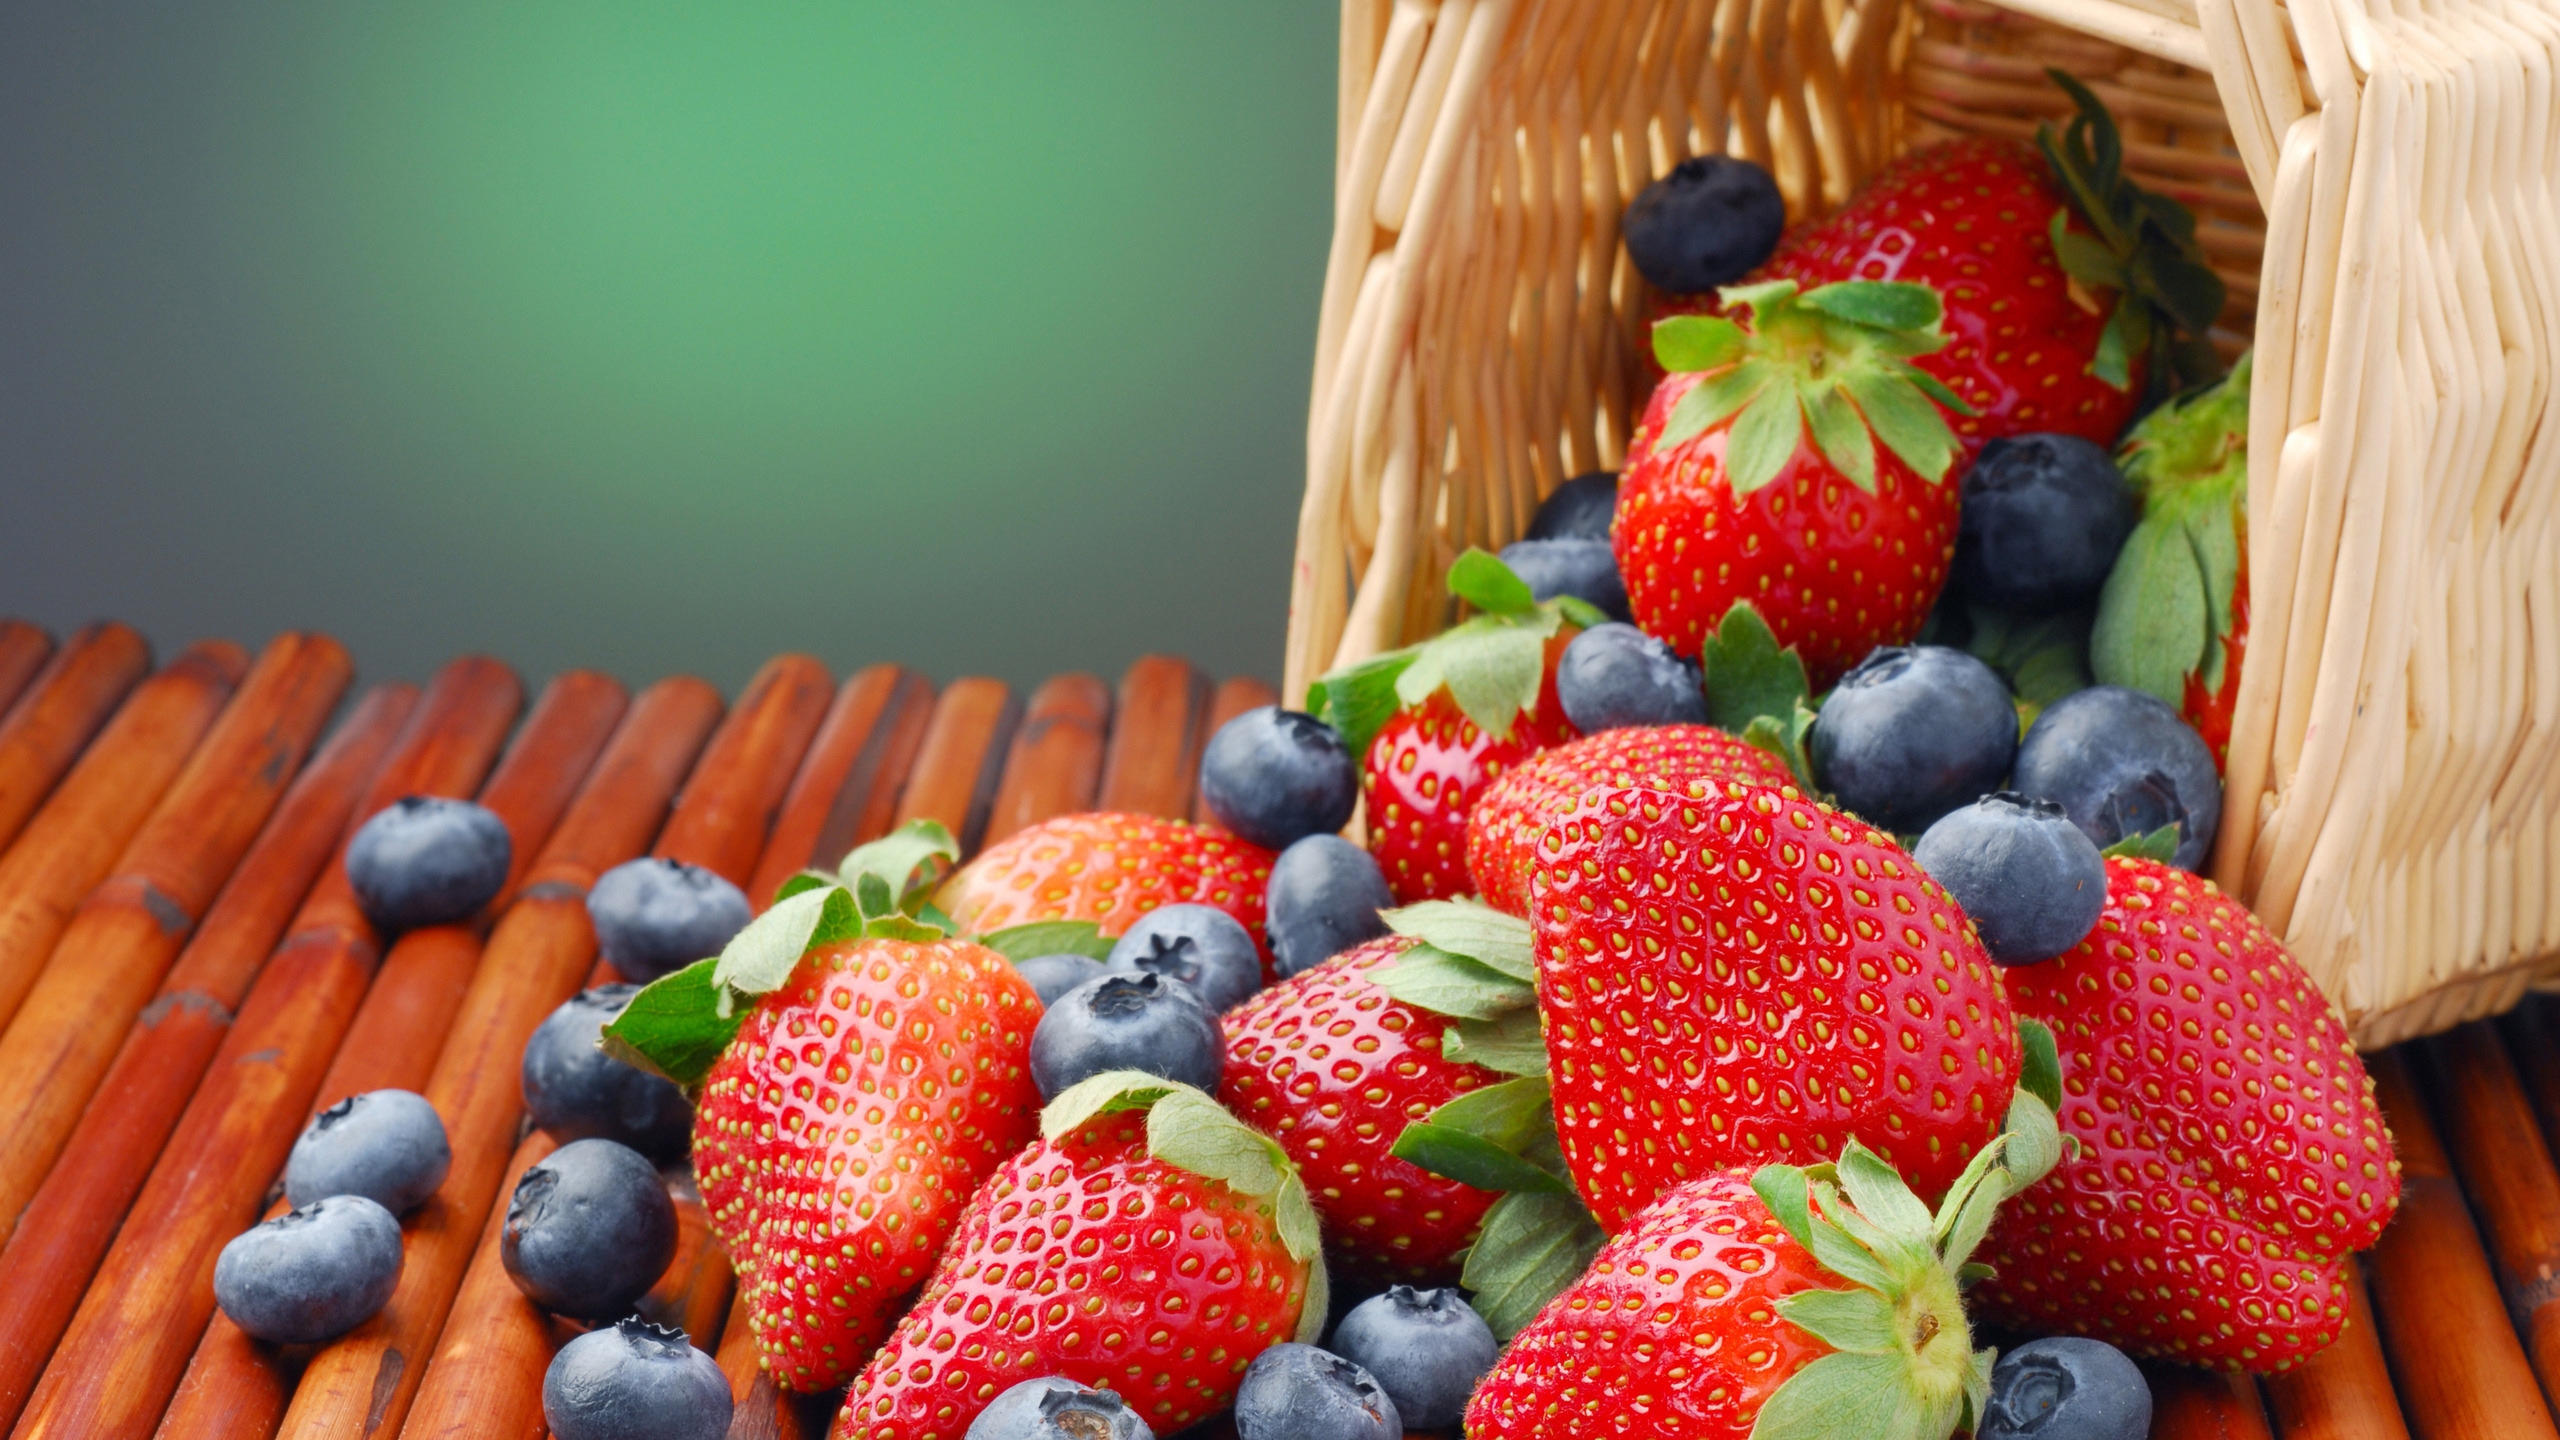 Blueberry and Strawberry for 2560x1440 HDTV resolution